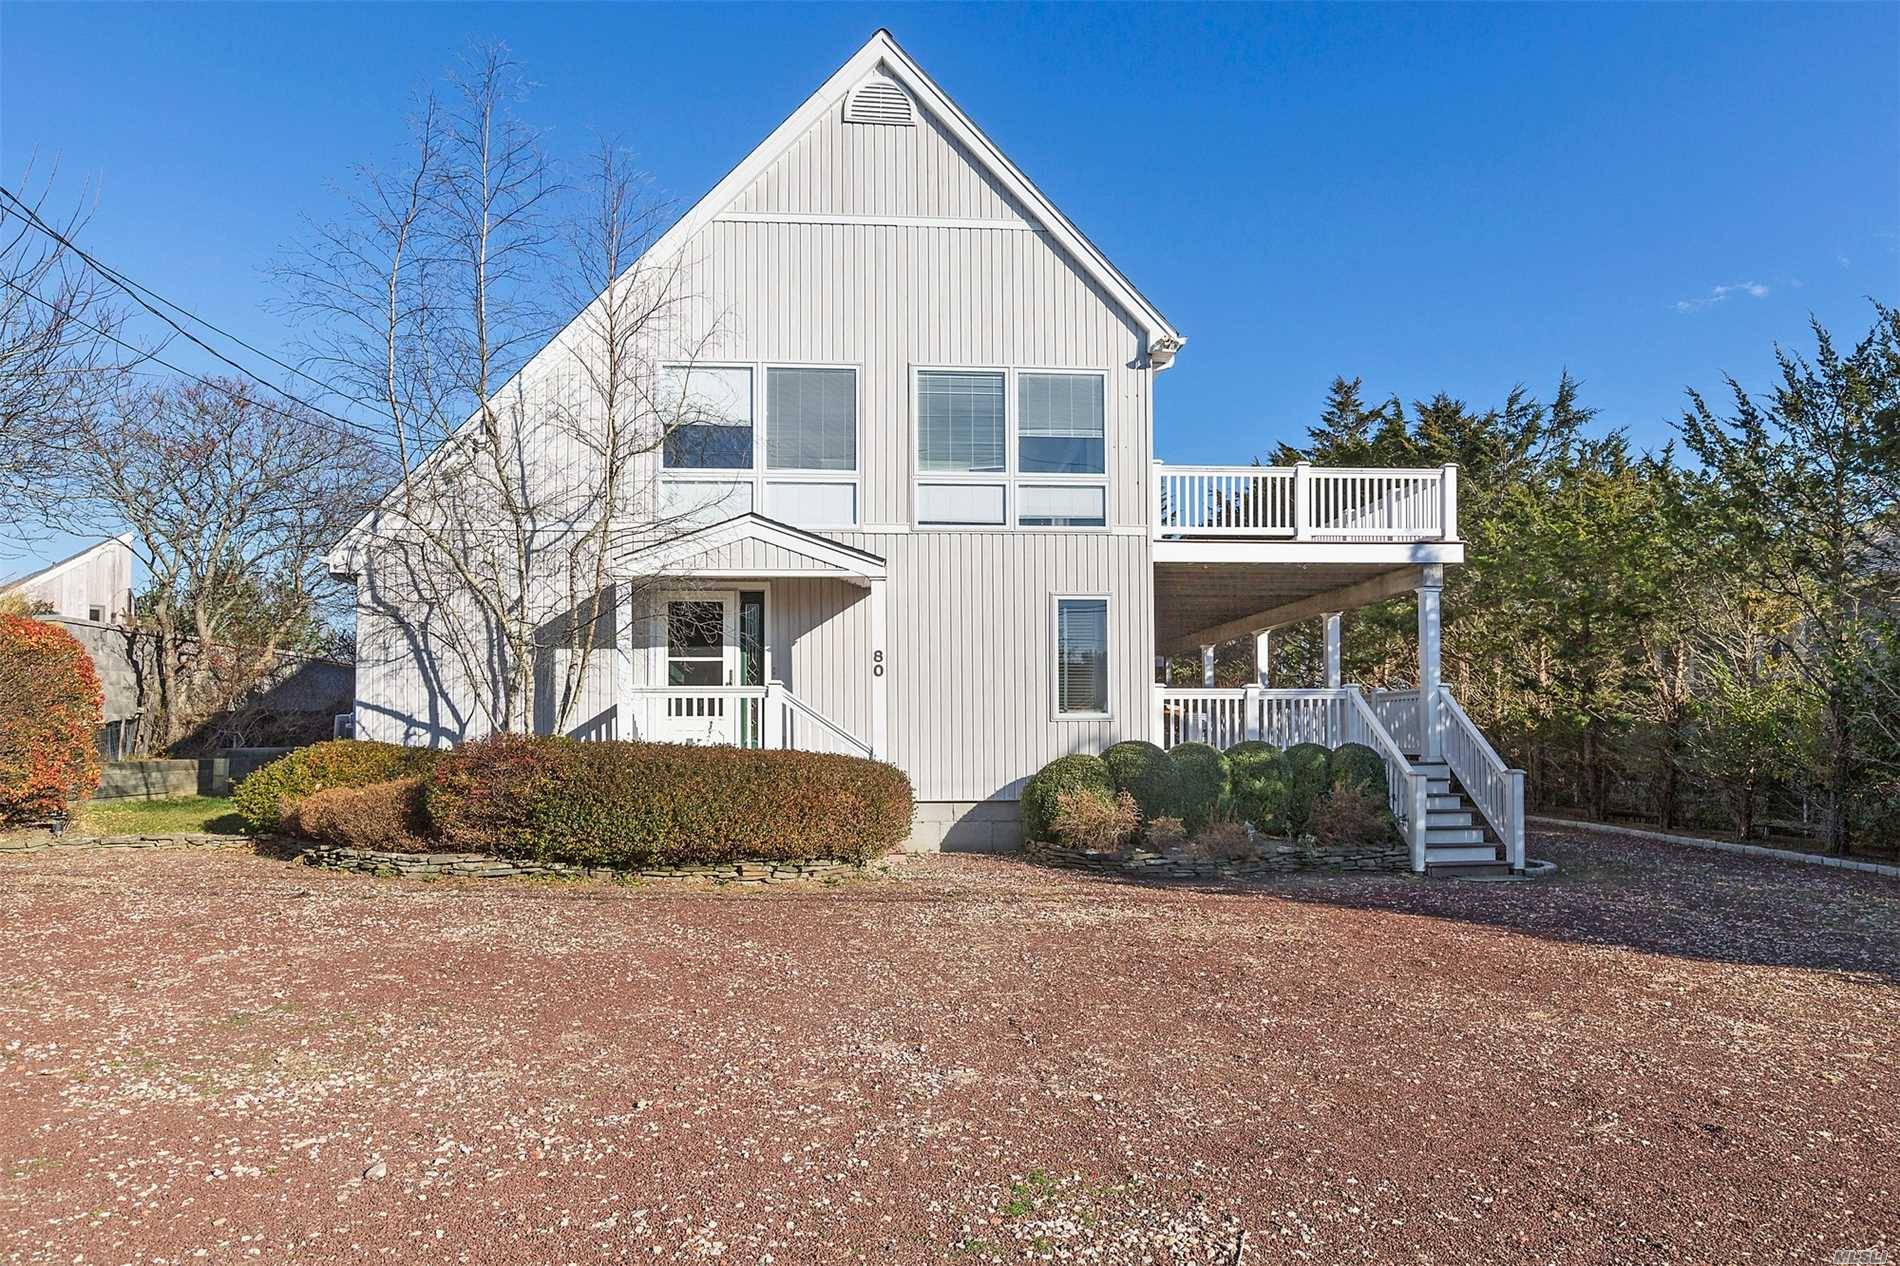 Deeded Hither Hills Ocean Access Comes With This Spacious, Light & Bright, 4 Bedroom 2 Bath Beach  House.